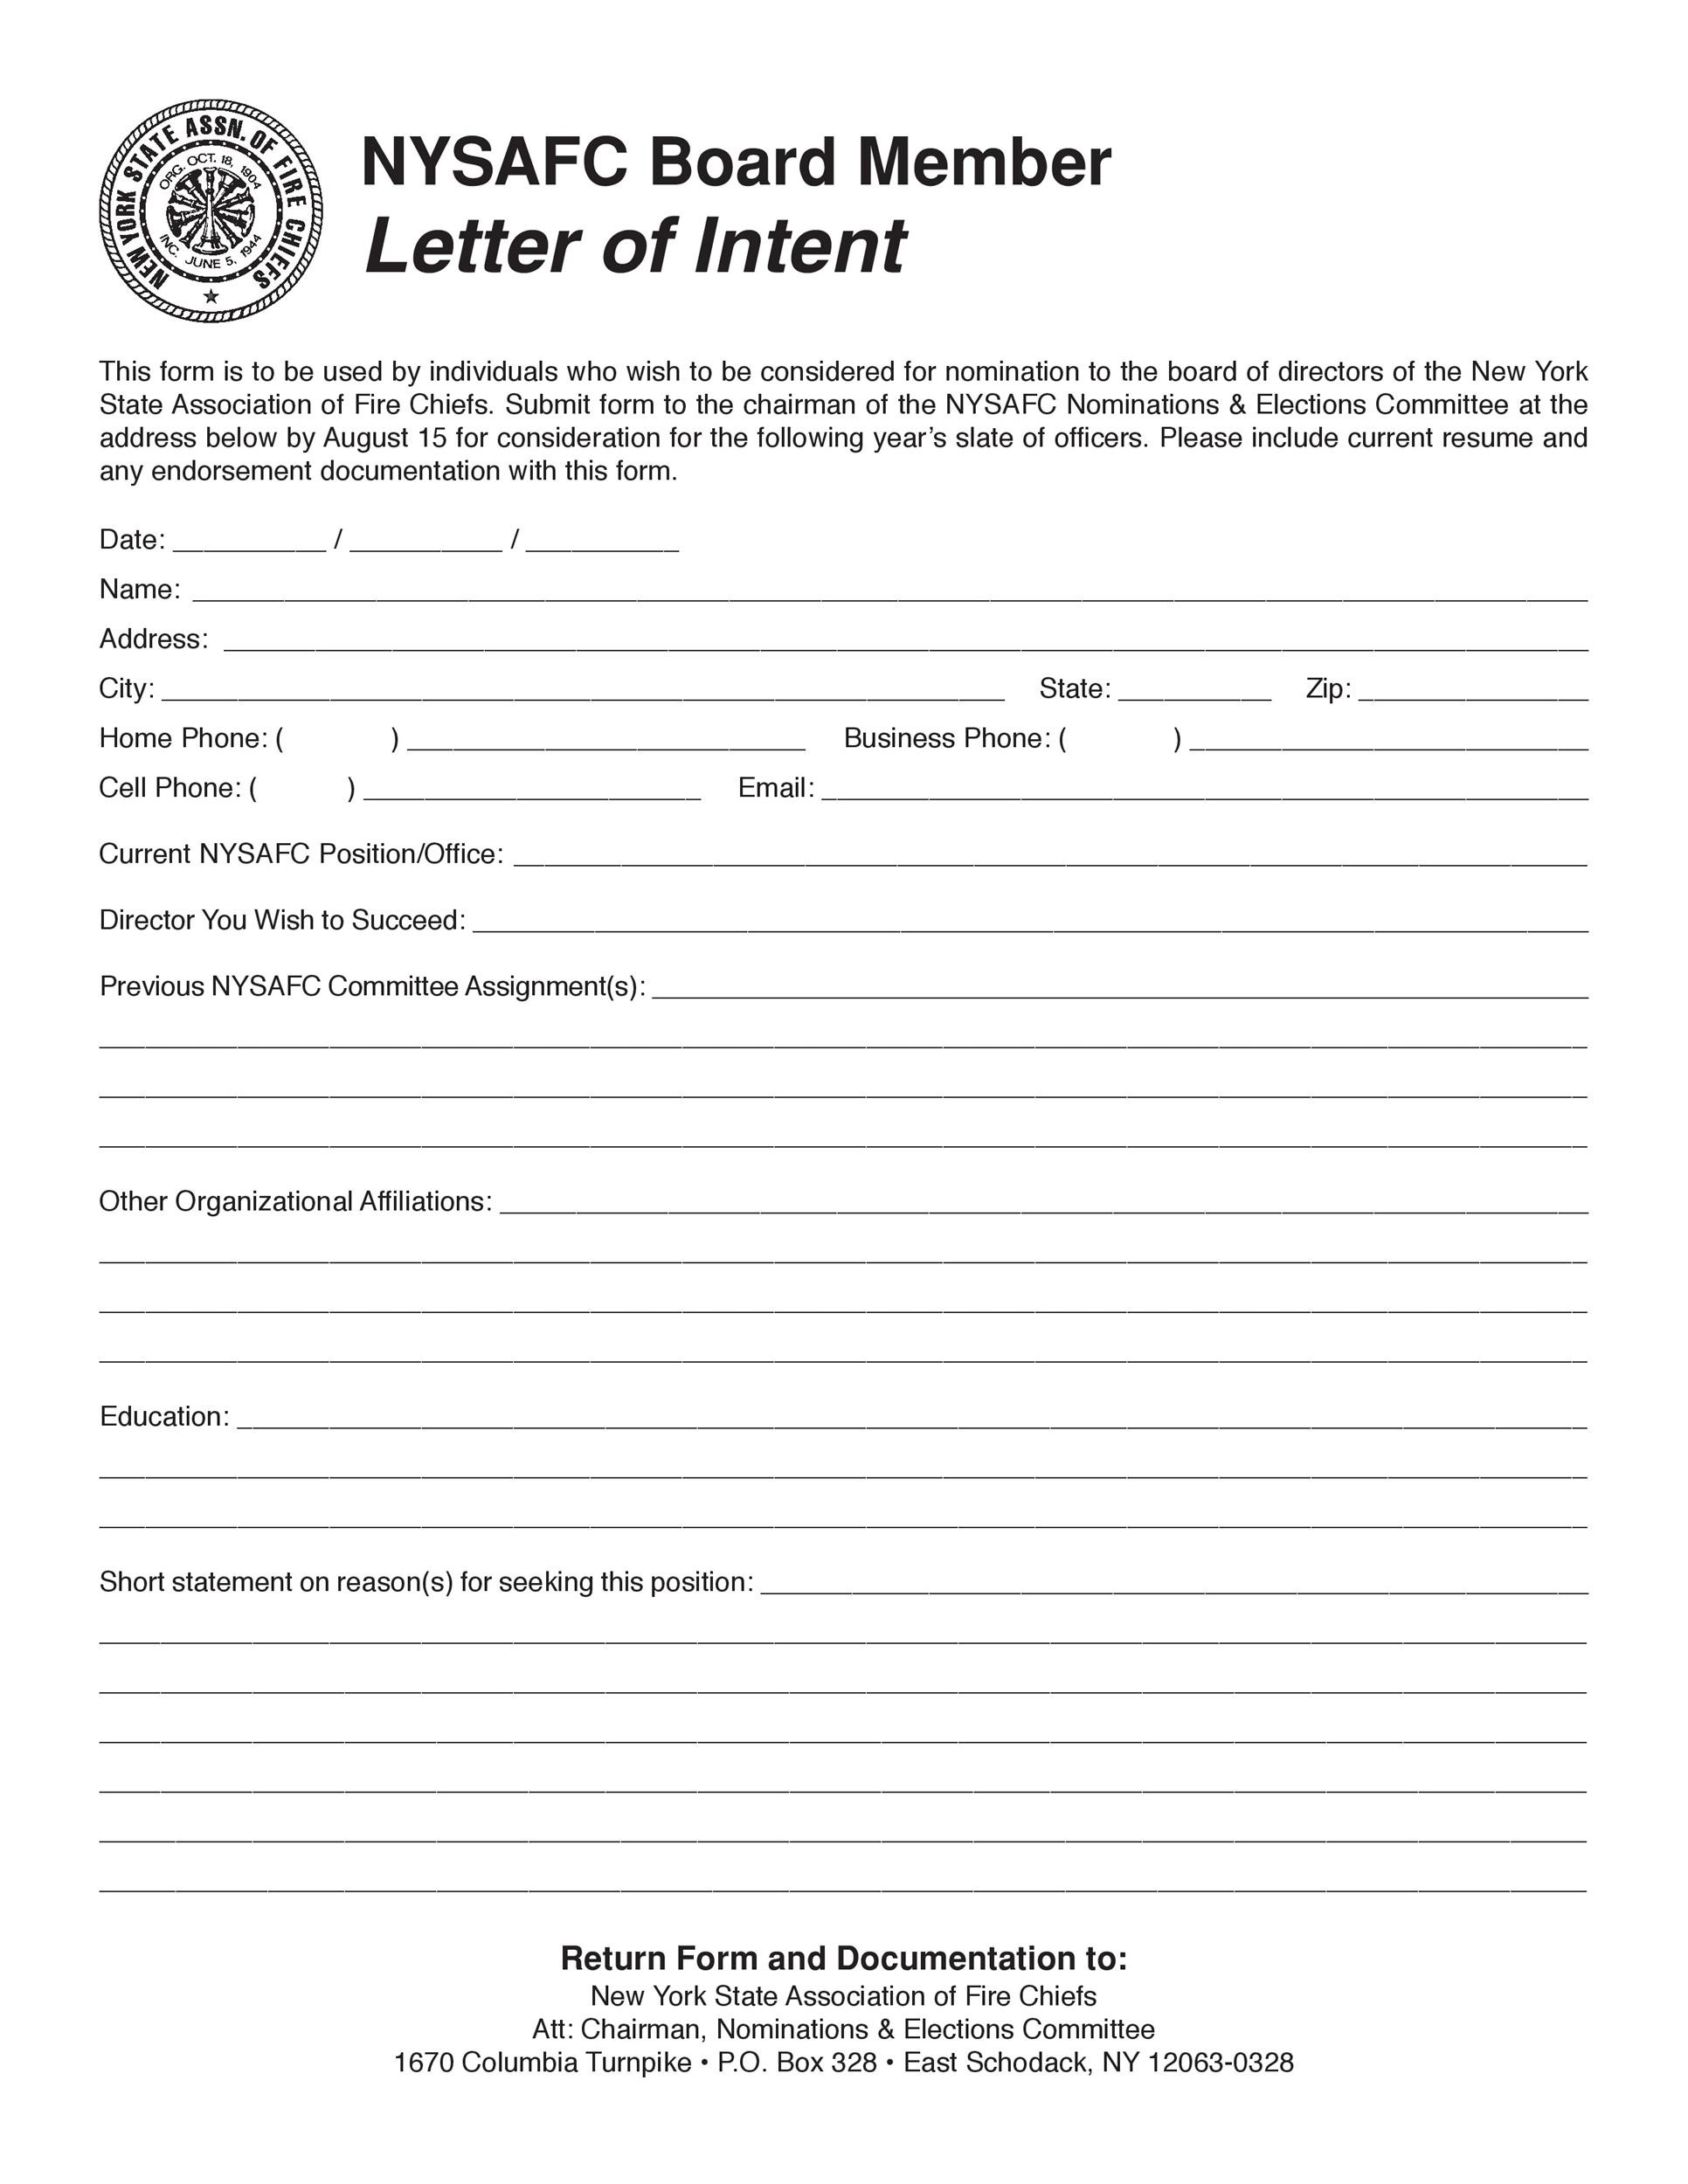 Free letter of intent 28